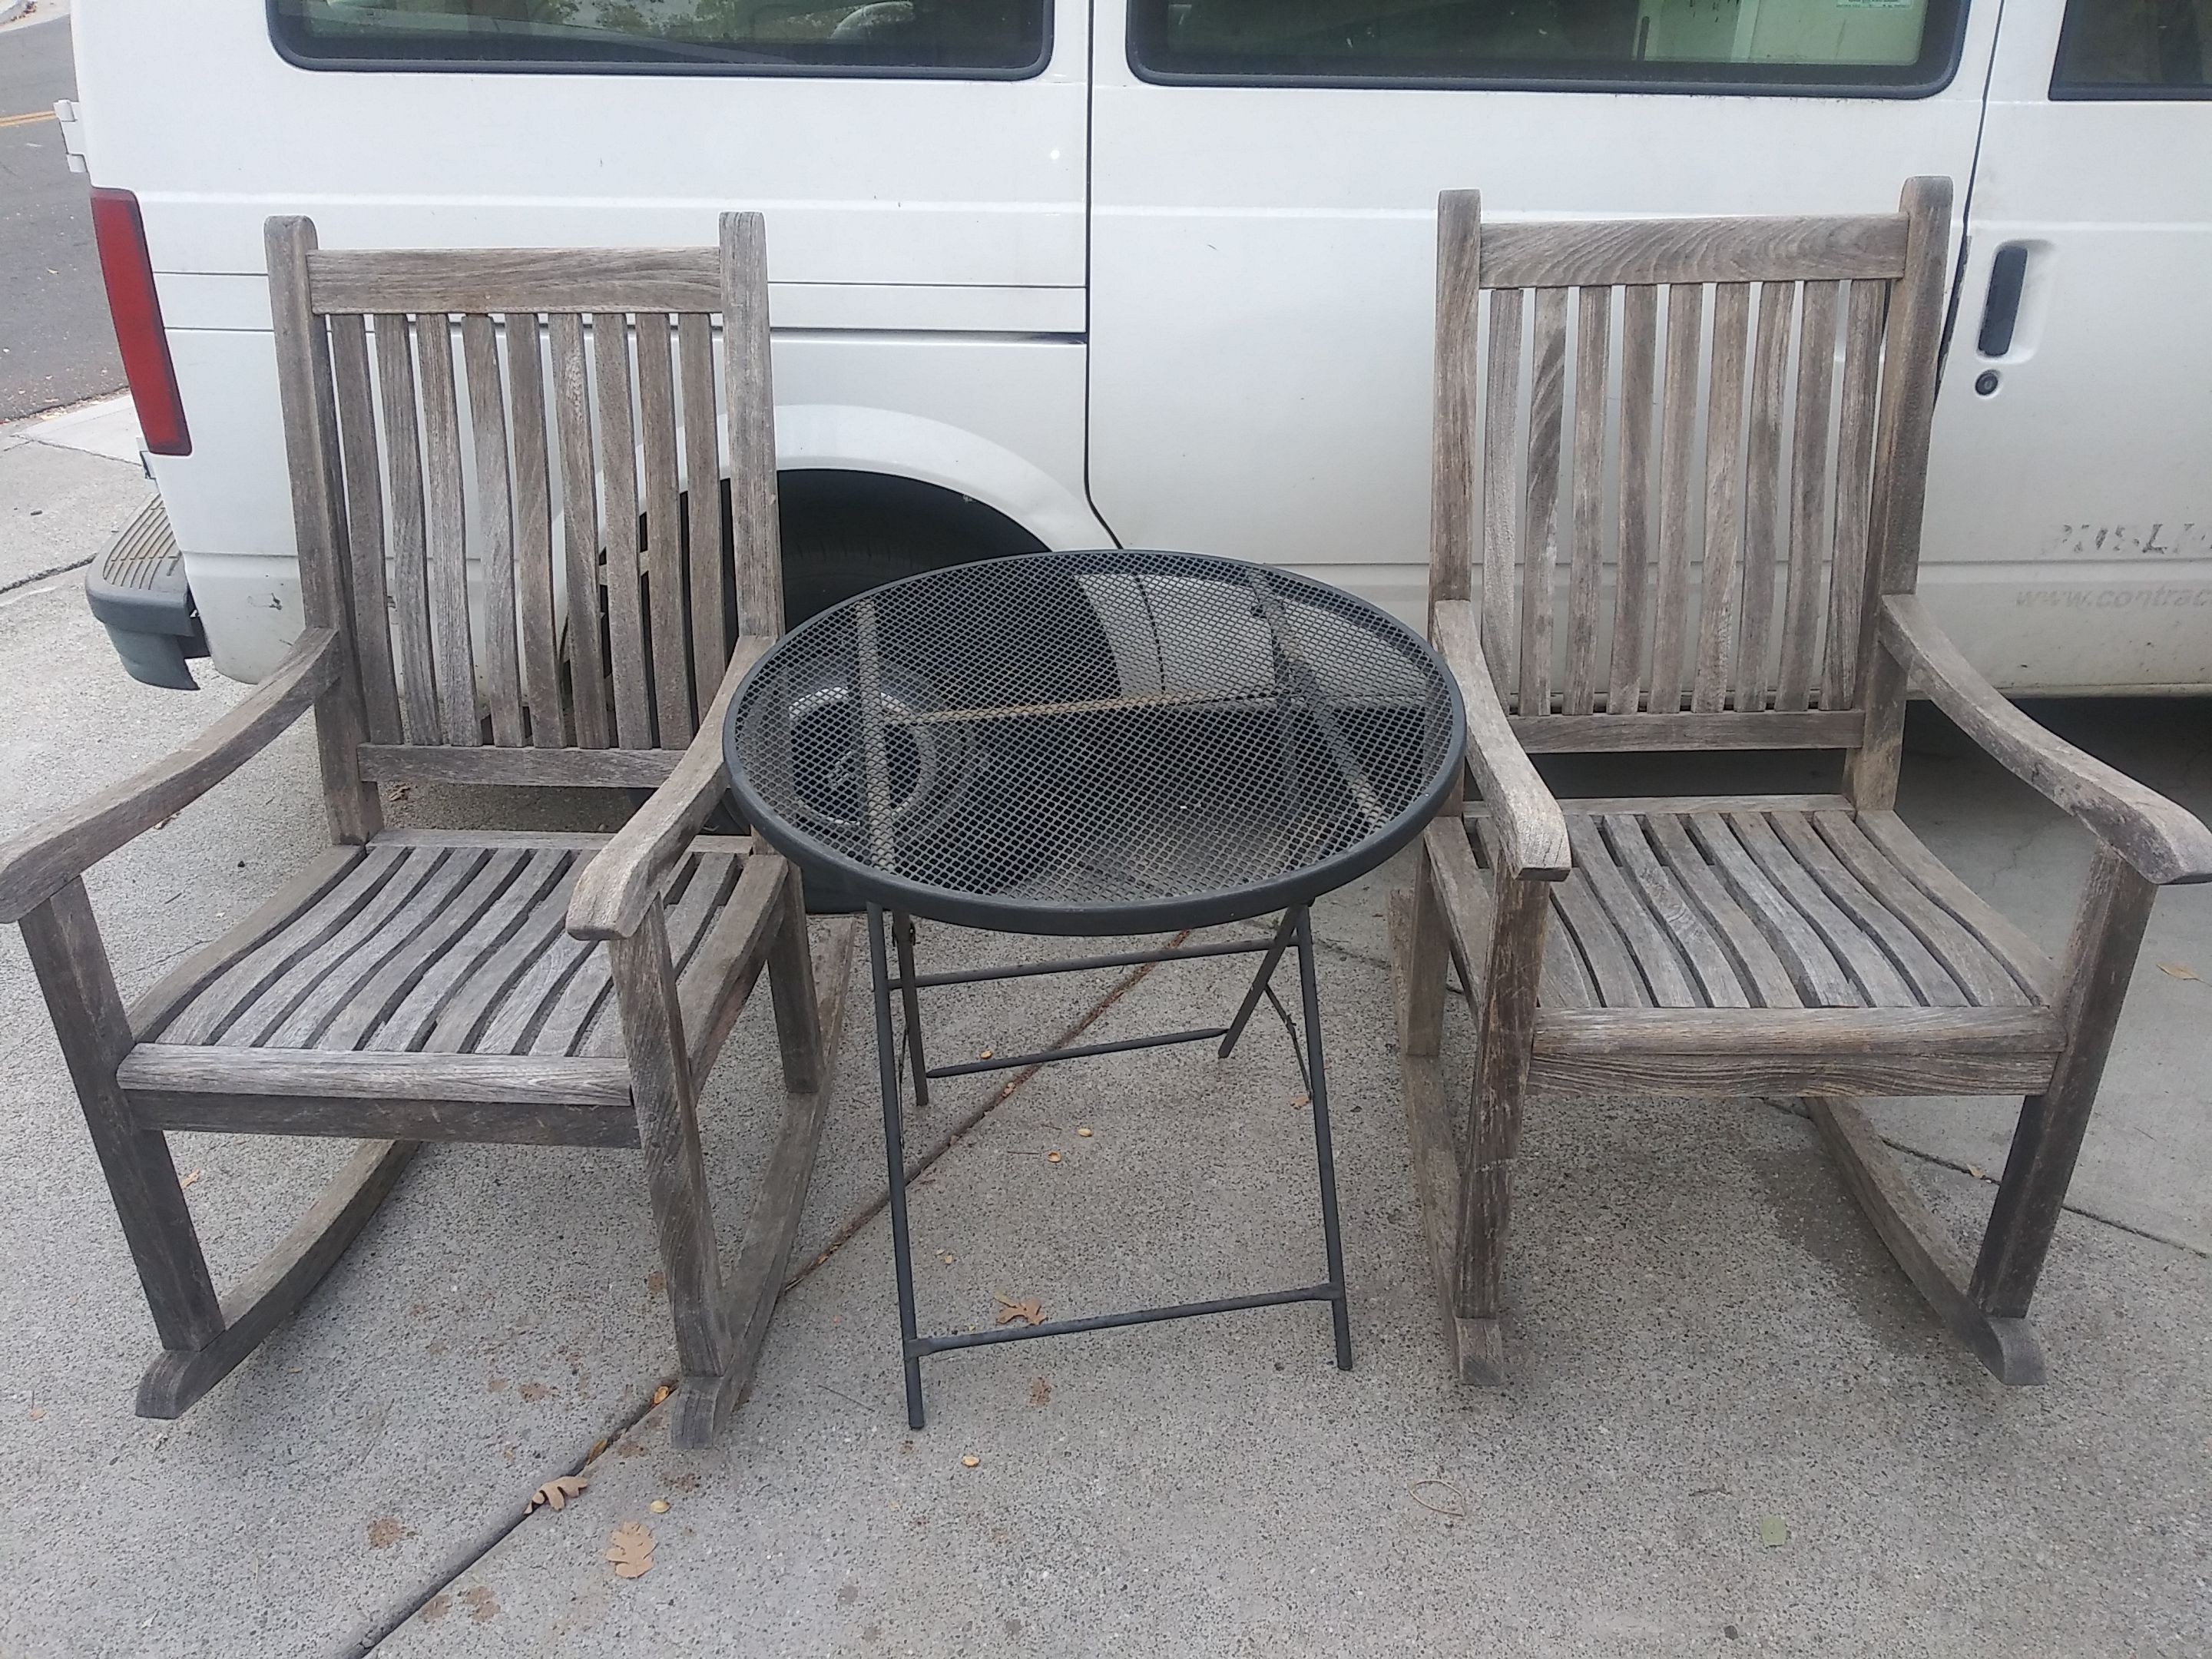 Brazillian Iron Wood outdoor patio rocking chairs and metal table